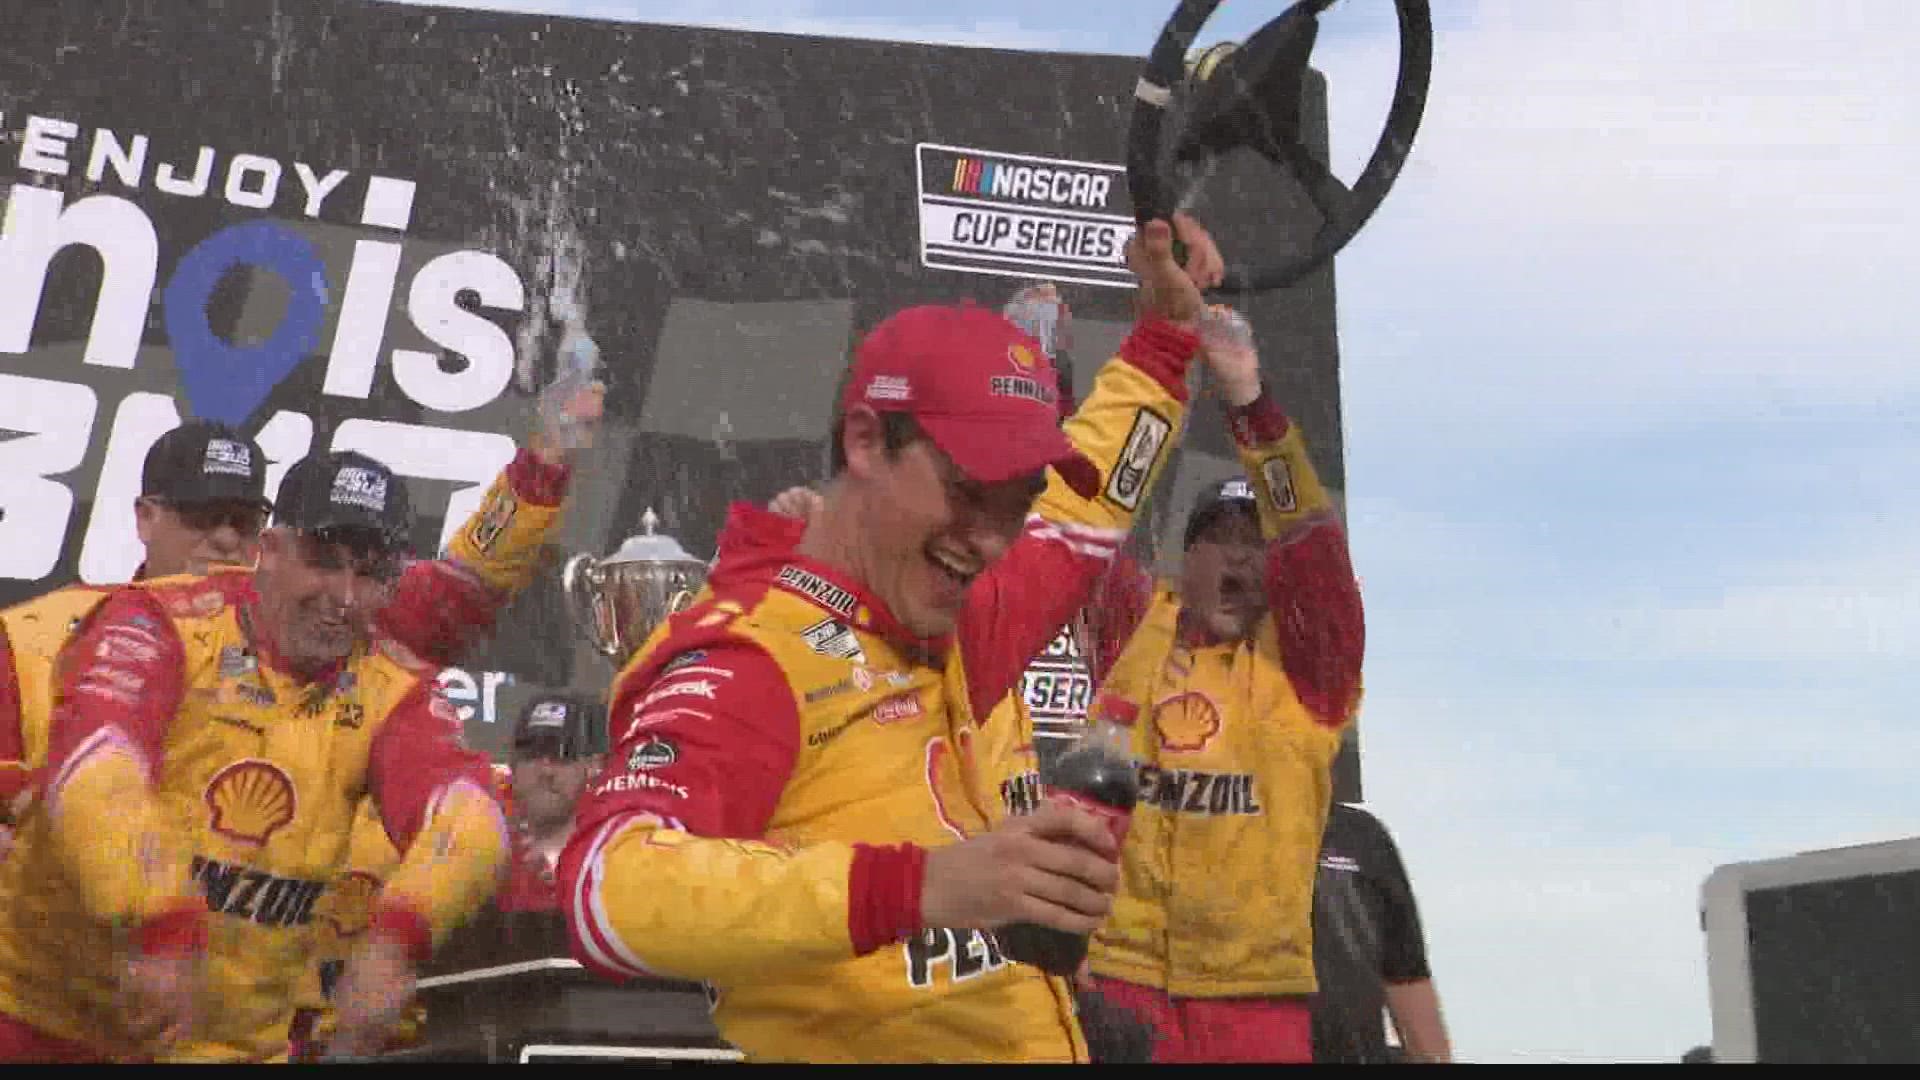 Joey Logano took the checkered flag at World Wide Technology Raceway, but it was St. Louis who won big this weekend.